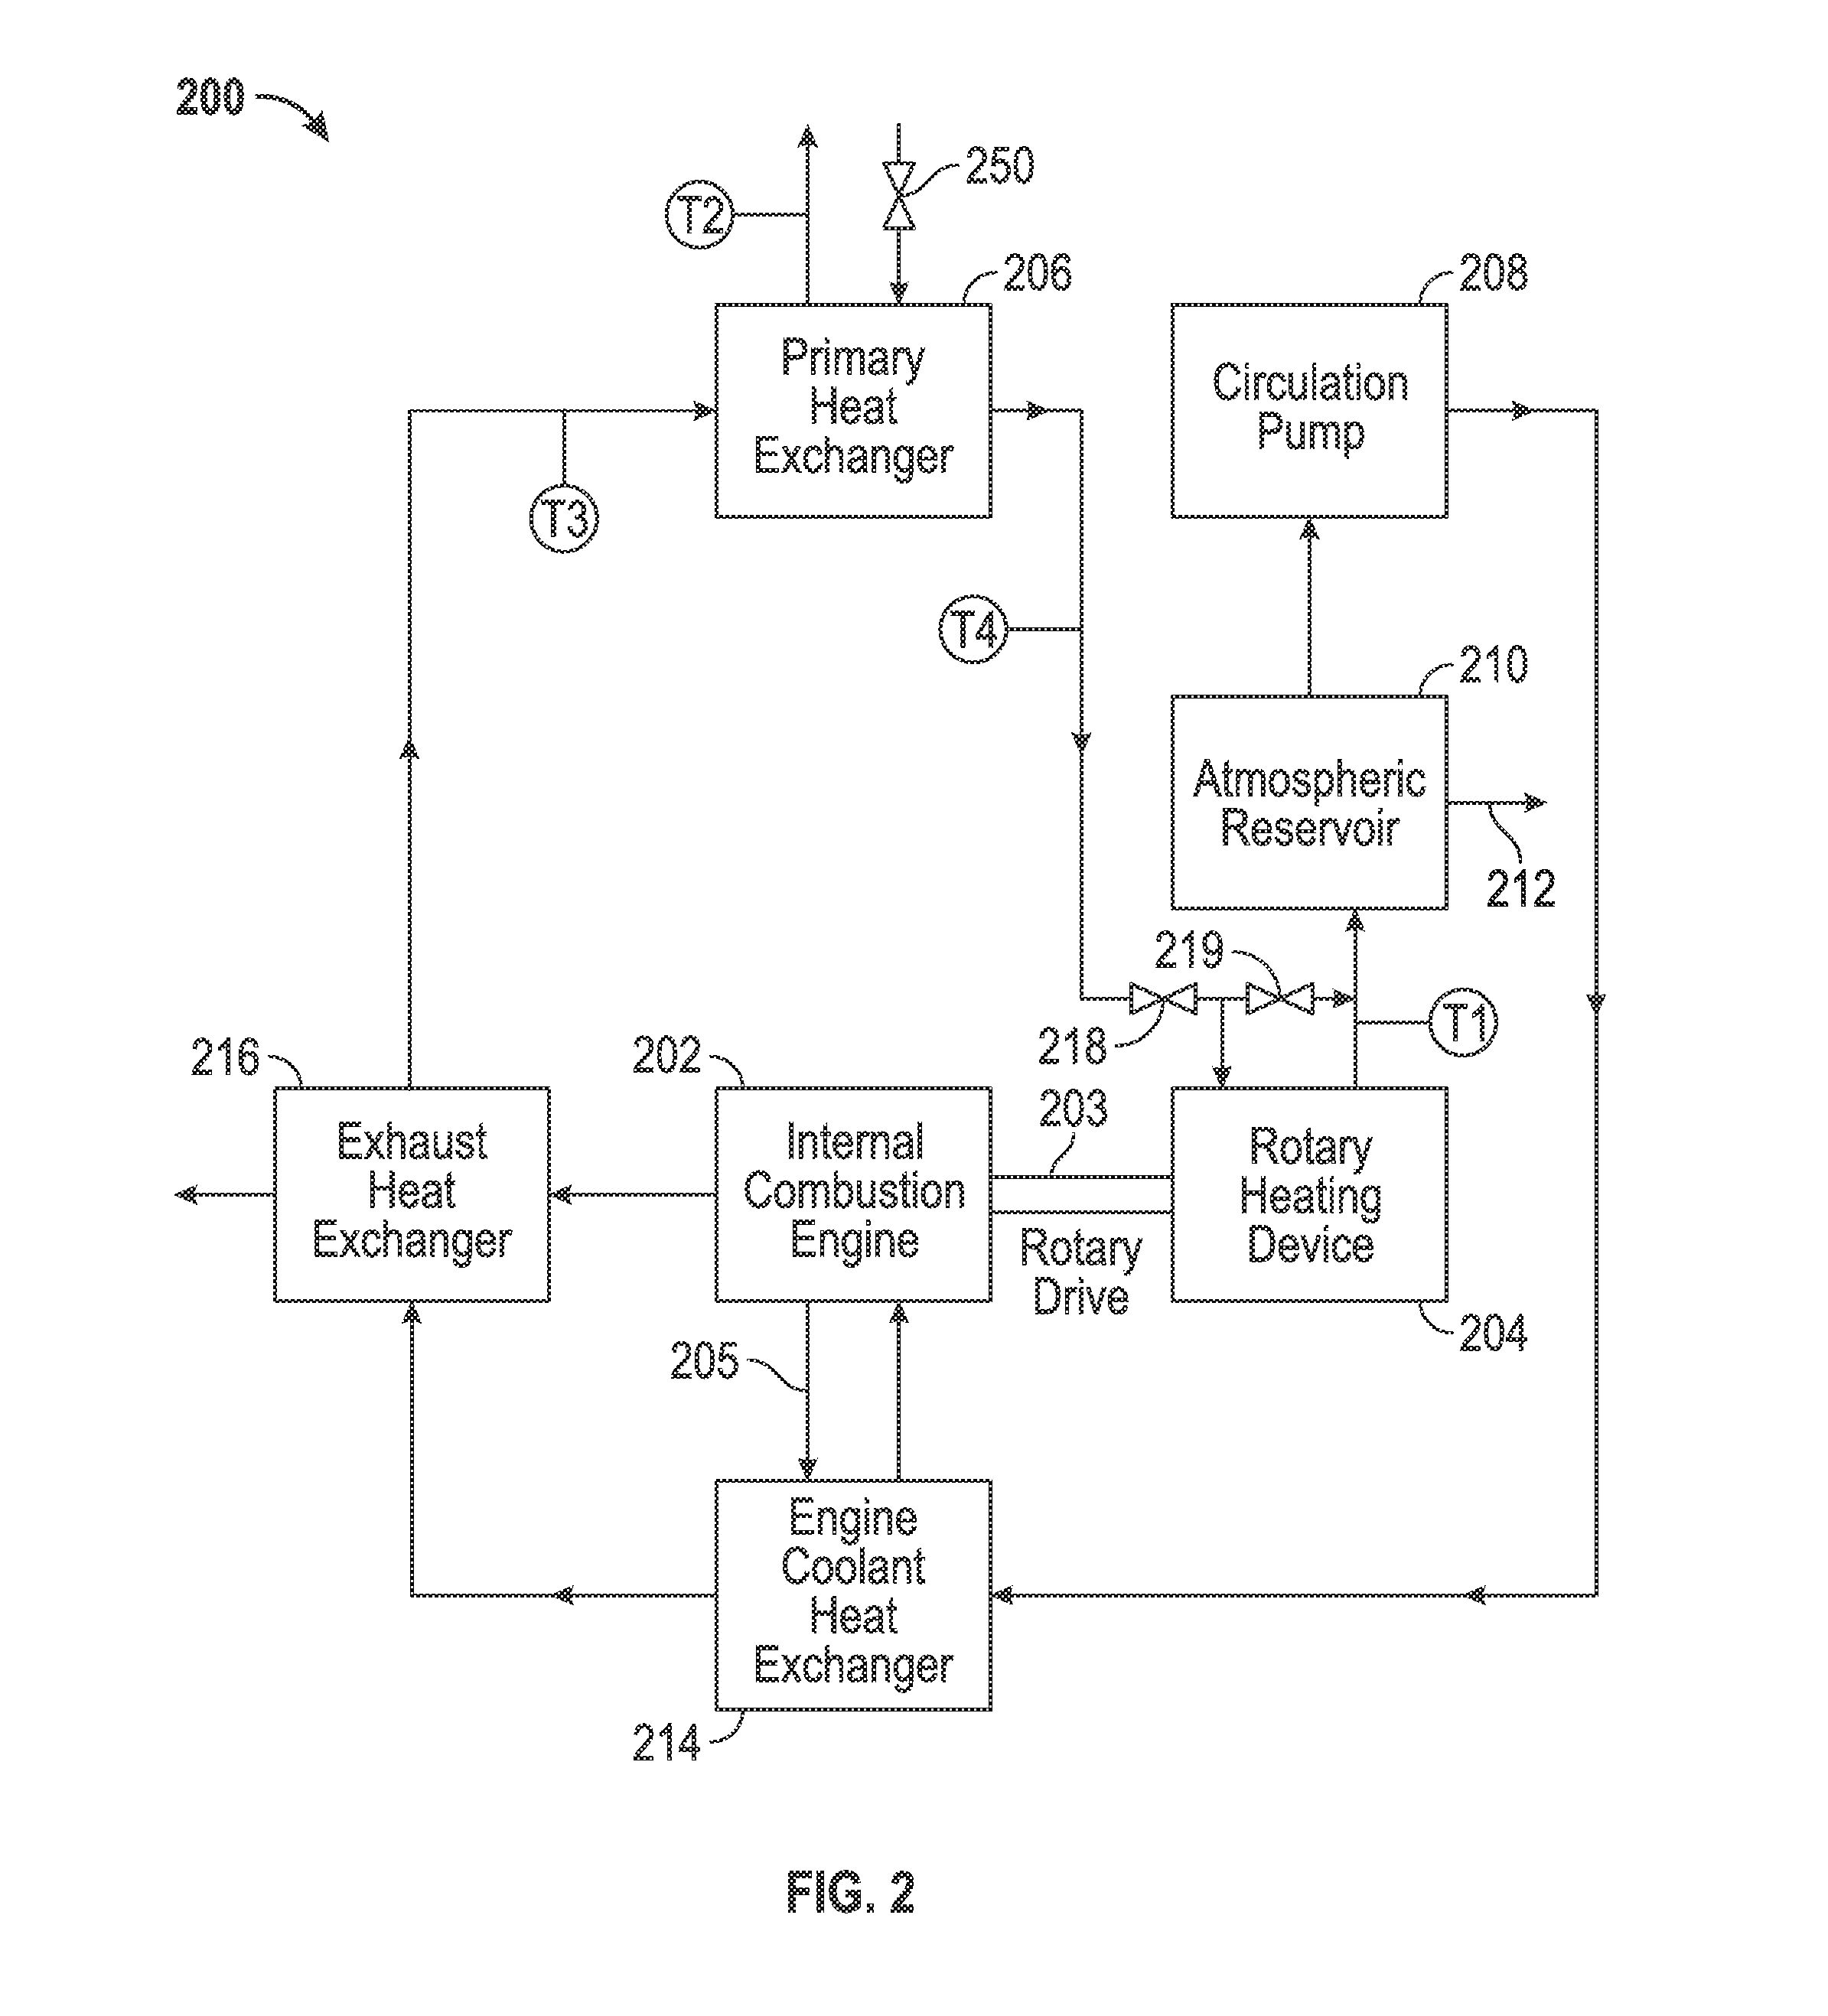 Methods and systems for heating and manipulating fluids